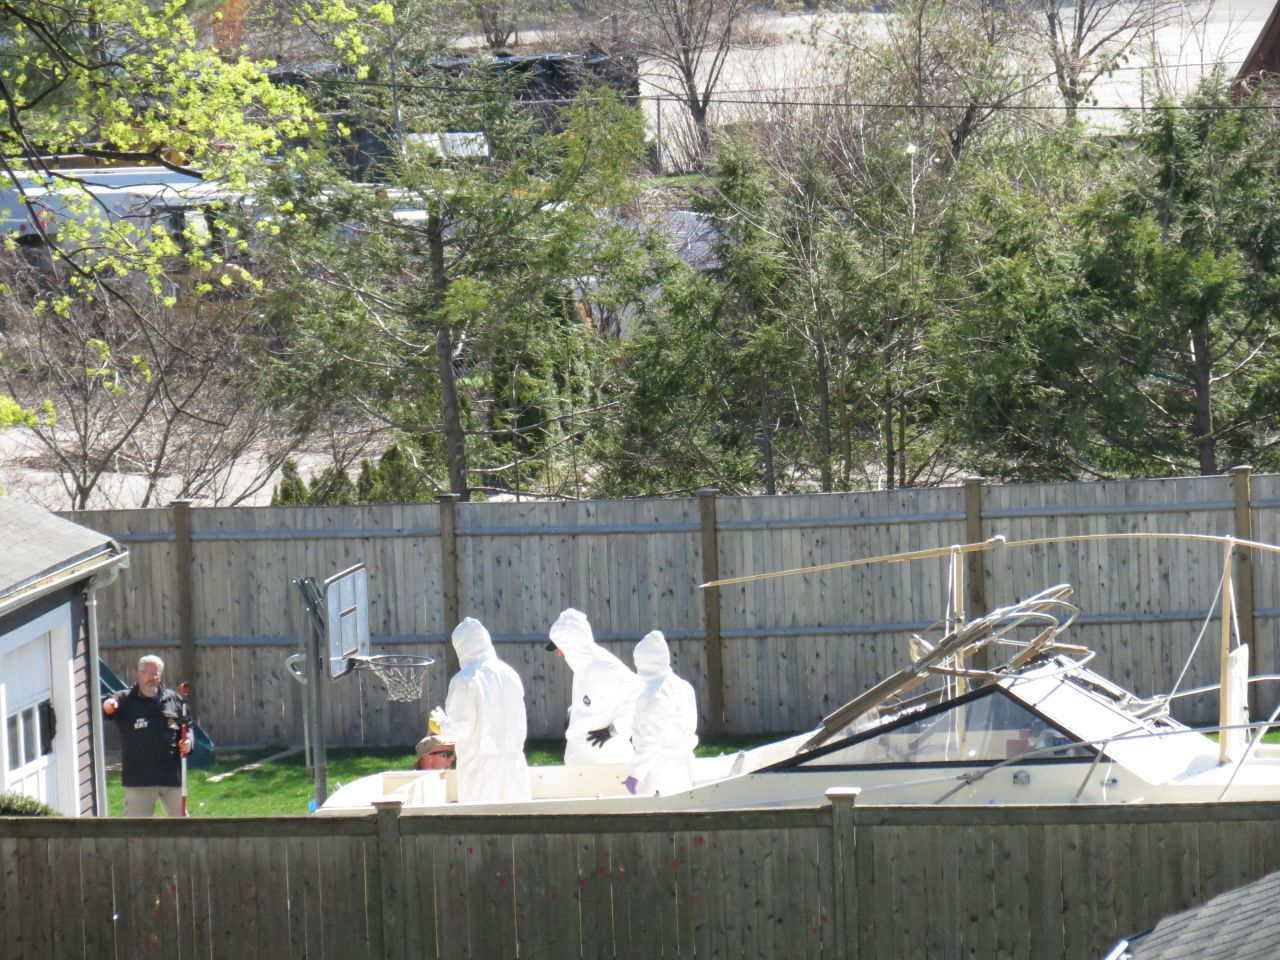 A police forensics team examines a boat April 22, 2013, in Watertown, Massachusetts, where Boston Marathon bombing suspect Dzhokhar Tsarnaev was discovered several days earlier and taken into custody.